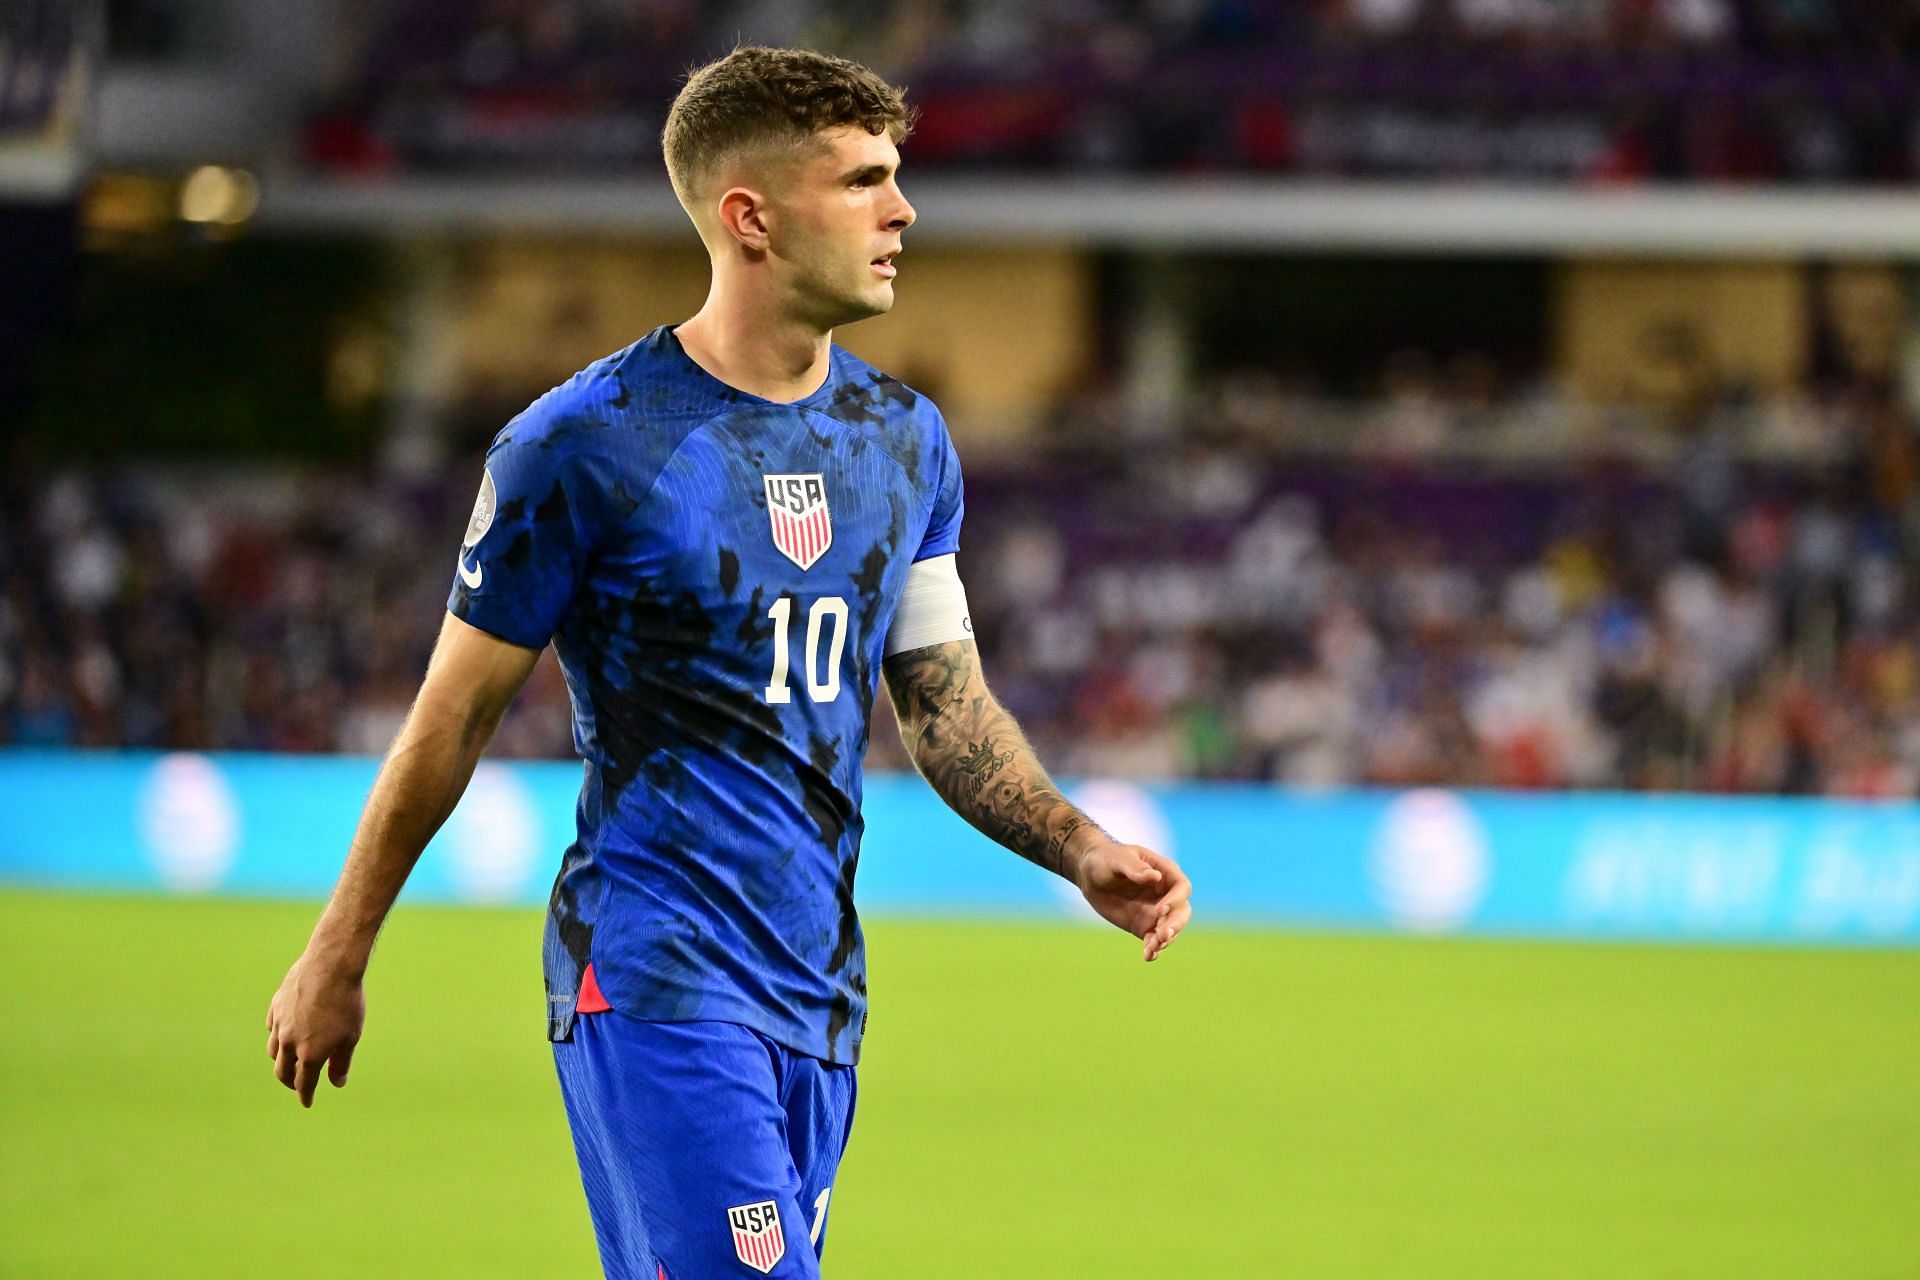 Christian Pulisic has admirers at Napoli.